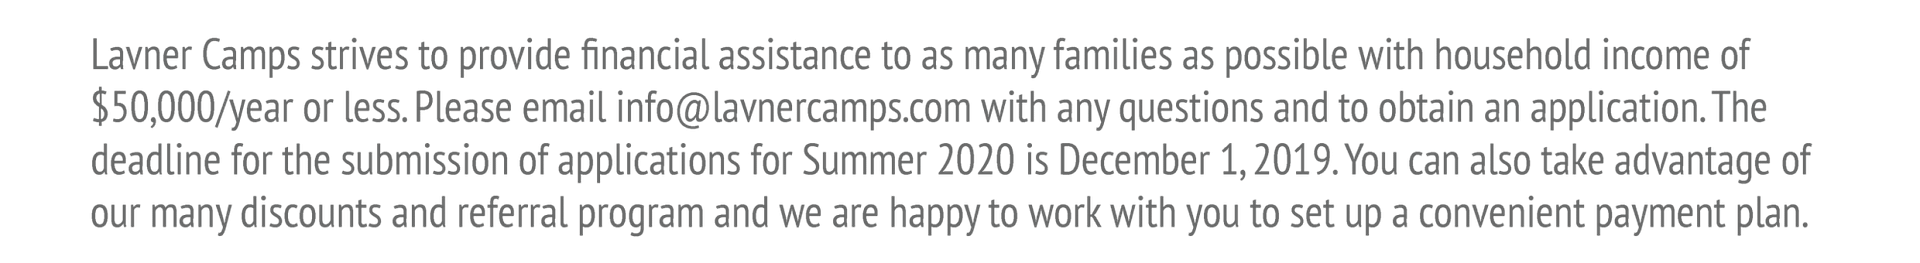 Philadelphia Summer Camps At Penn Lavner Camps 2020 Tech Camps - intermediate roblox programming full color edition